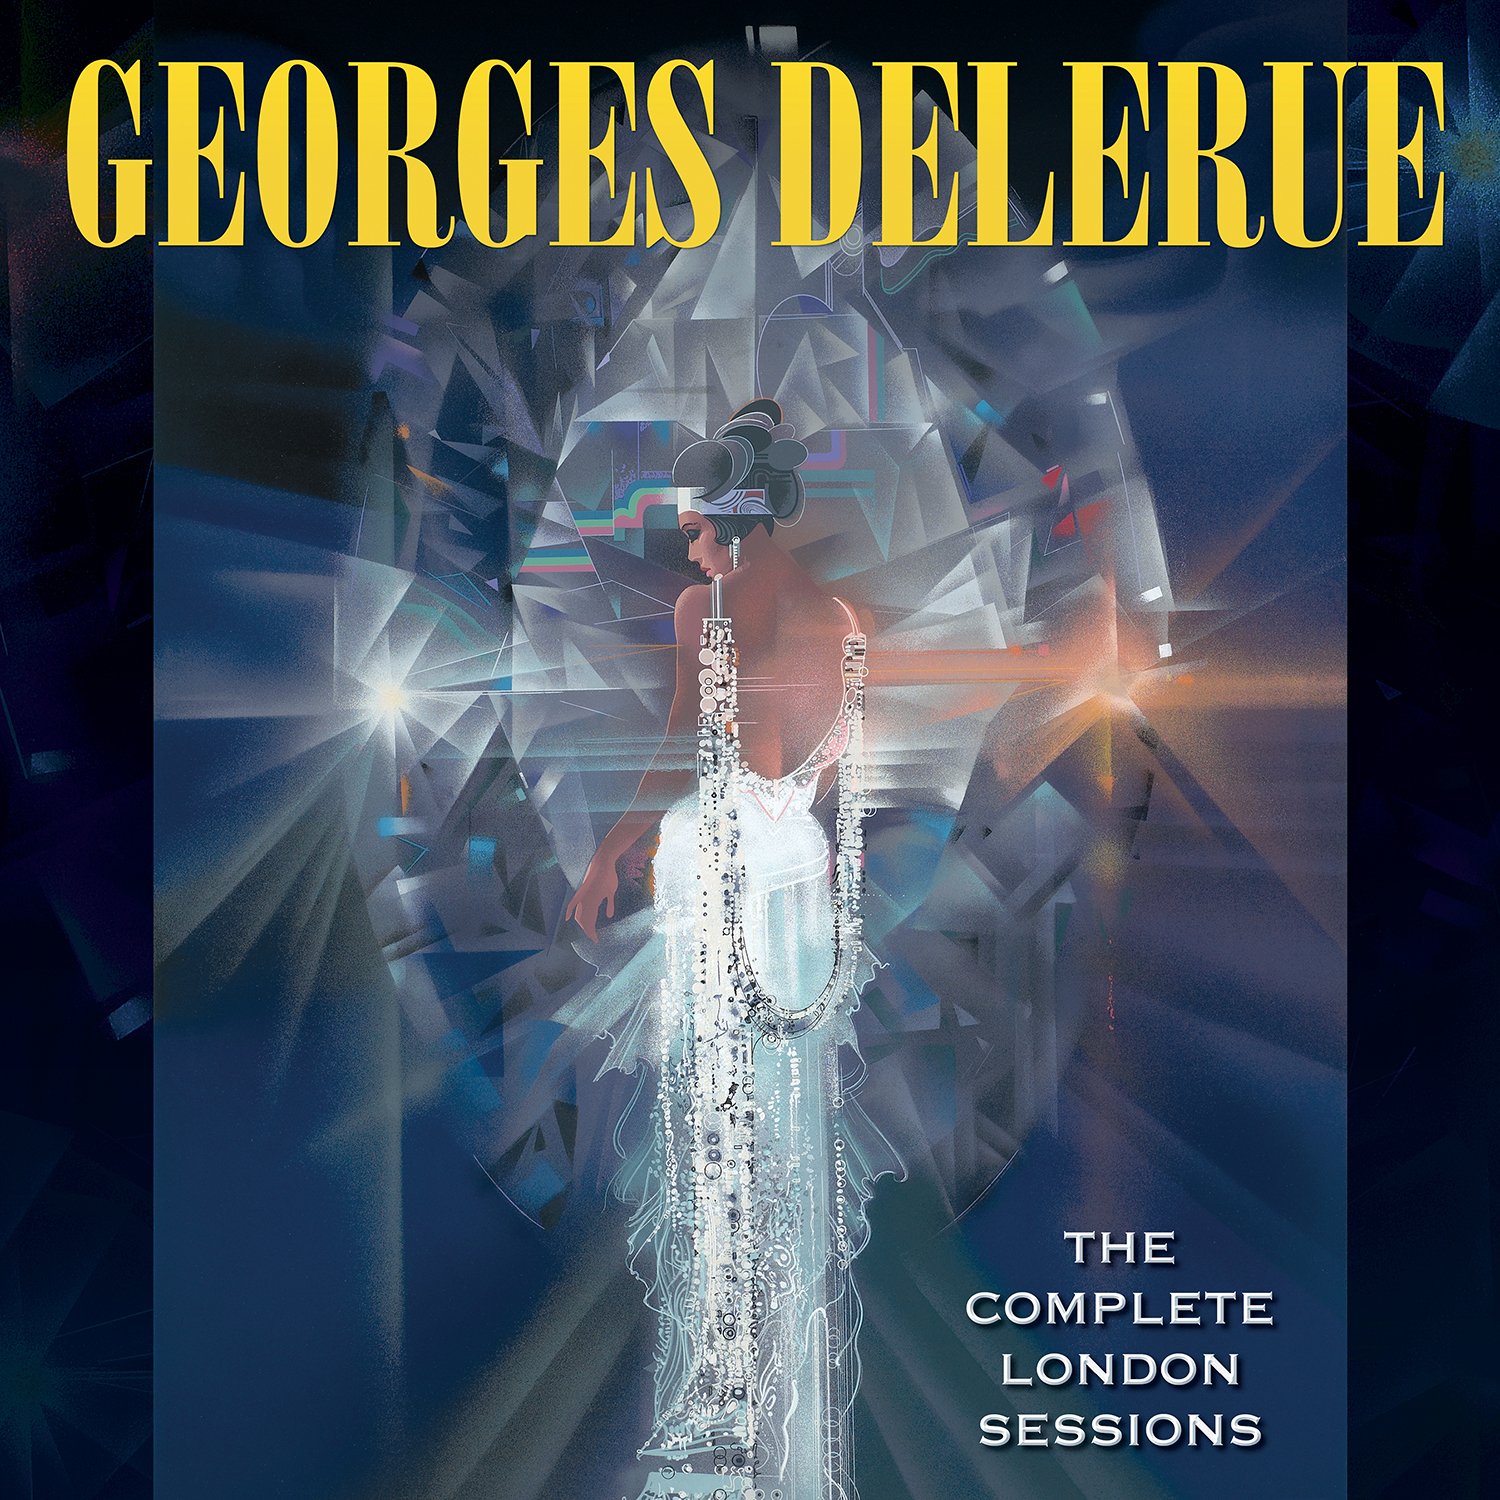 Georges Delerue: The Complete London Sessions